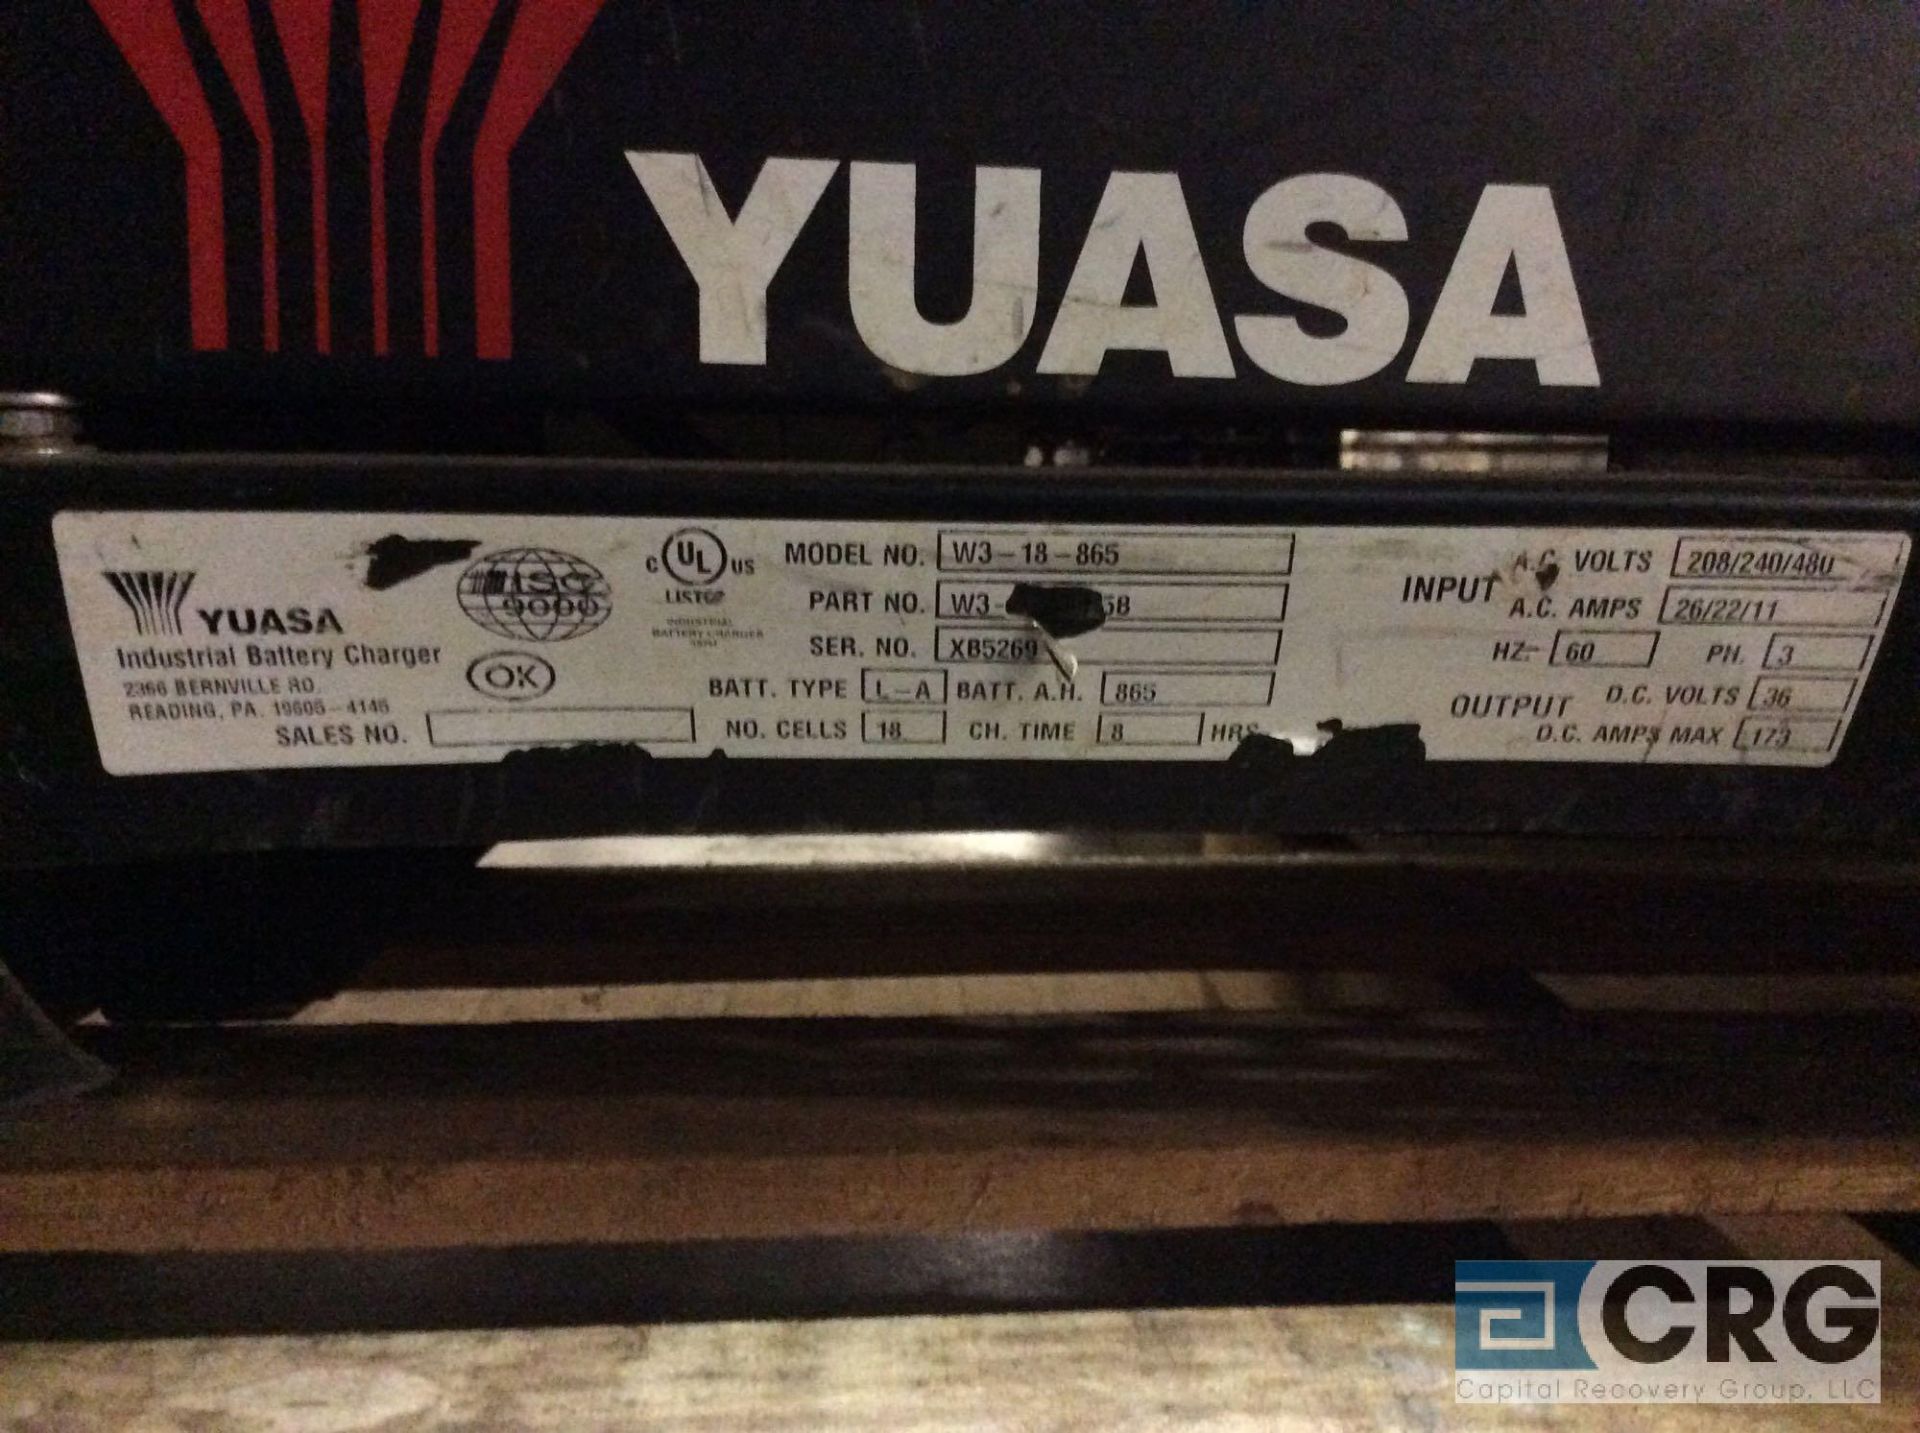 Exide/Yuasa WorkHog W3-18-865 battery charger, 18 cell, 36 volts, 208/240/480 3 phase - Image 2 of 2